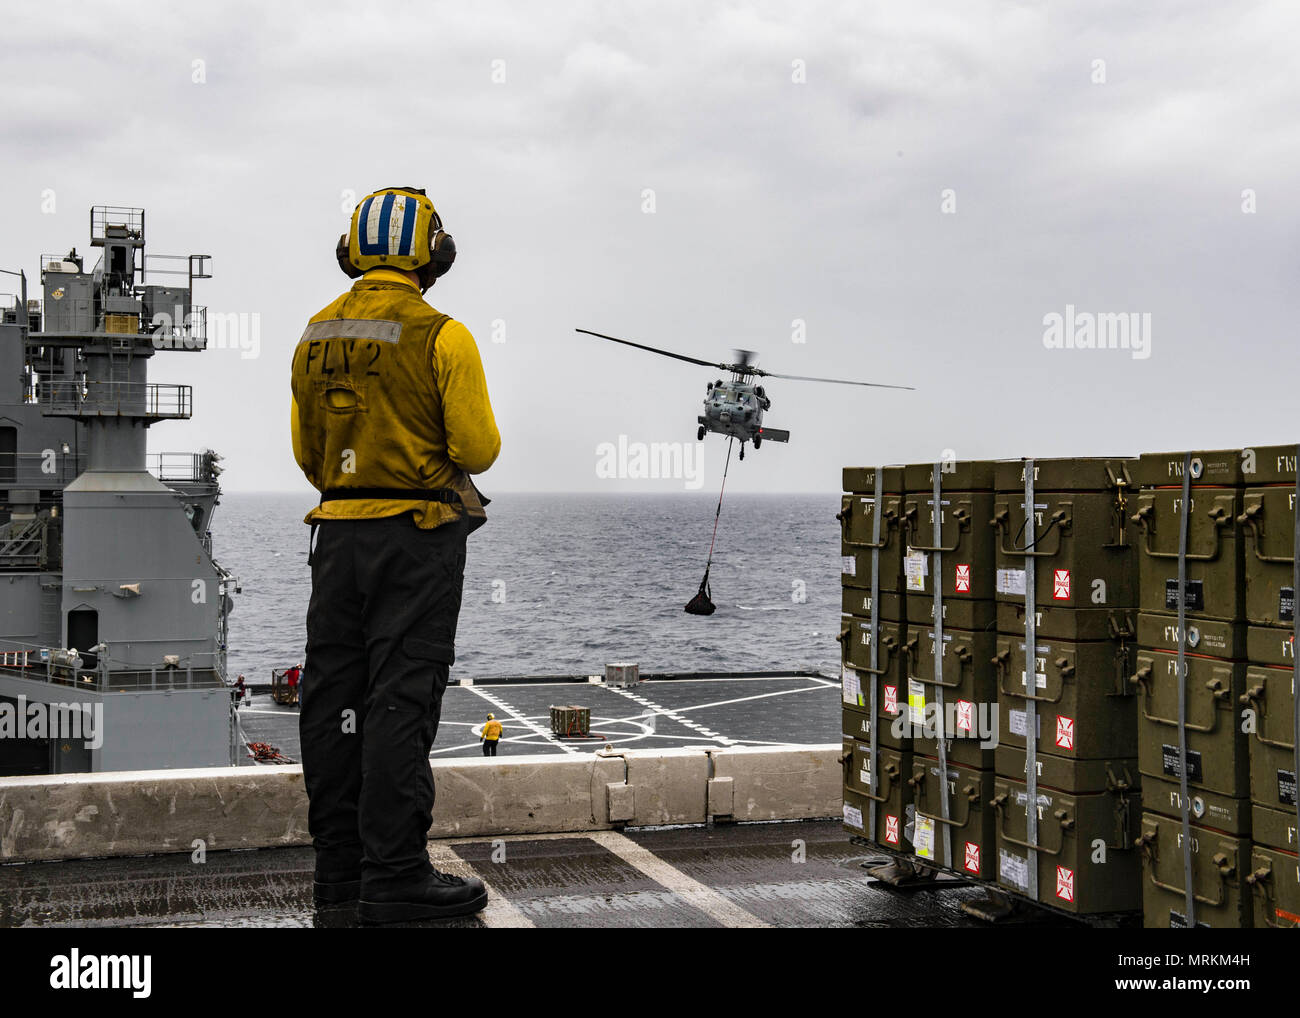 170621-N-TJ319-271   ATLANTIC OCEAN (June 21, 2017) Aviation Boatswain’s Mate (Handling) Airman John Renckens, from Selma, Ore., observes a MH-60S Sea Hawk assigned to the Dusty Dogs of Helicopter Sea Combat Squadron (HSC) 7 from the flight deck of the aircraft carrier USS Dwight D. Eisenhower (CVN 69) during an ammunition offload with the Military Sea Lift Command dry cargo and ammunition ship USNS Medgar Evers (T-AKE 13). Ike is underway during the sustainment phase of the Optimized Fleet Response Plan (OFRP). (U.S. Navy photo by Mass Communication Specialist Seaman Jessica L. Dowell) Stock Photo